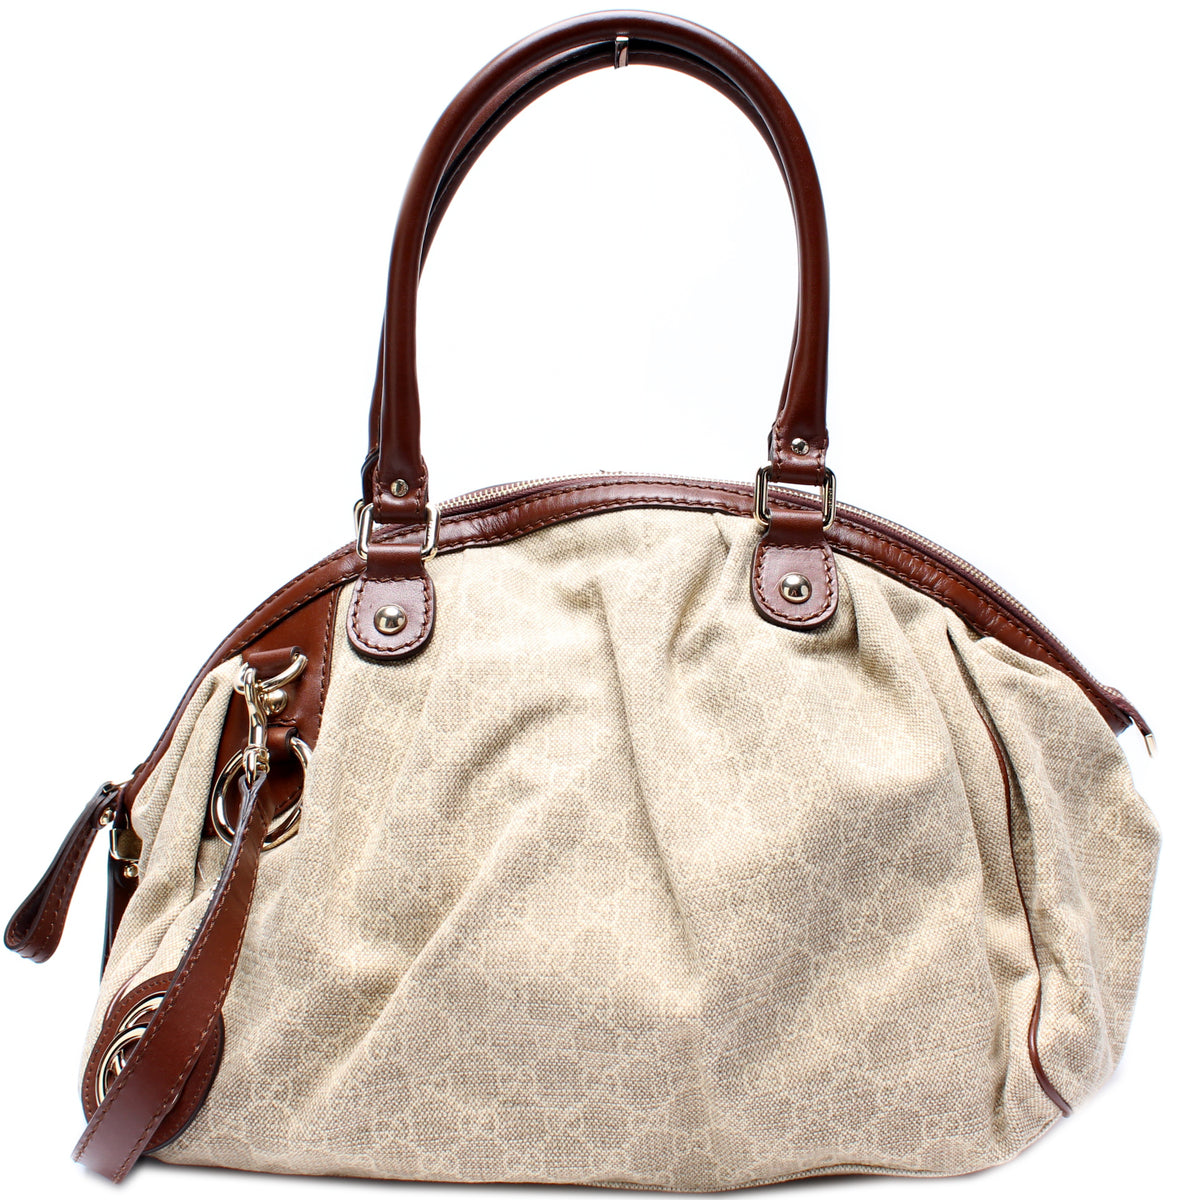 Mcm - Authenticated Boston Handbag - Linen Brown for Women, Very Good Condition